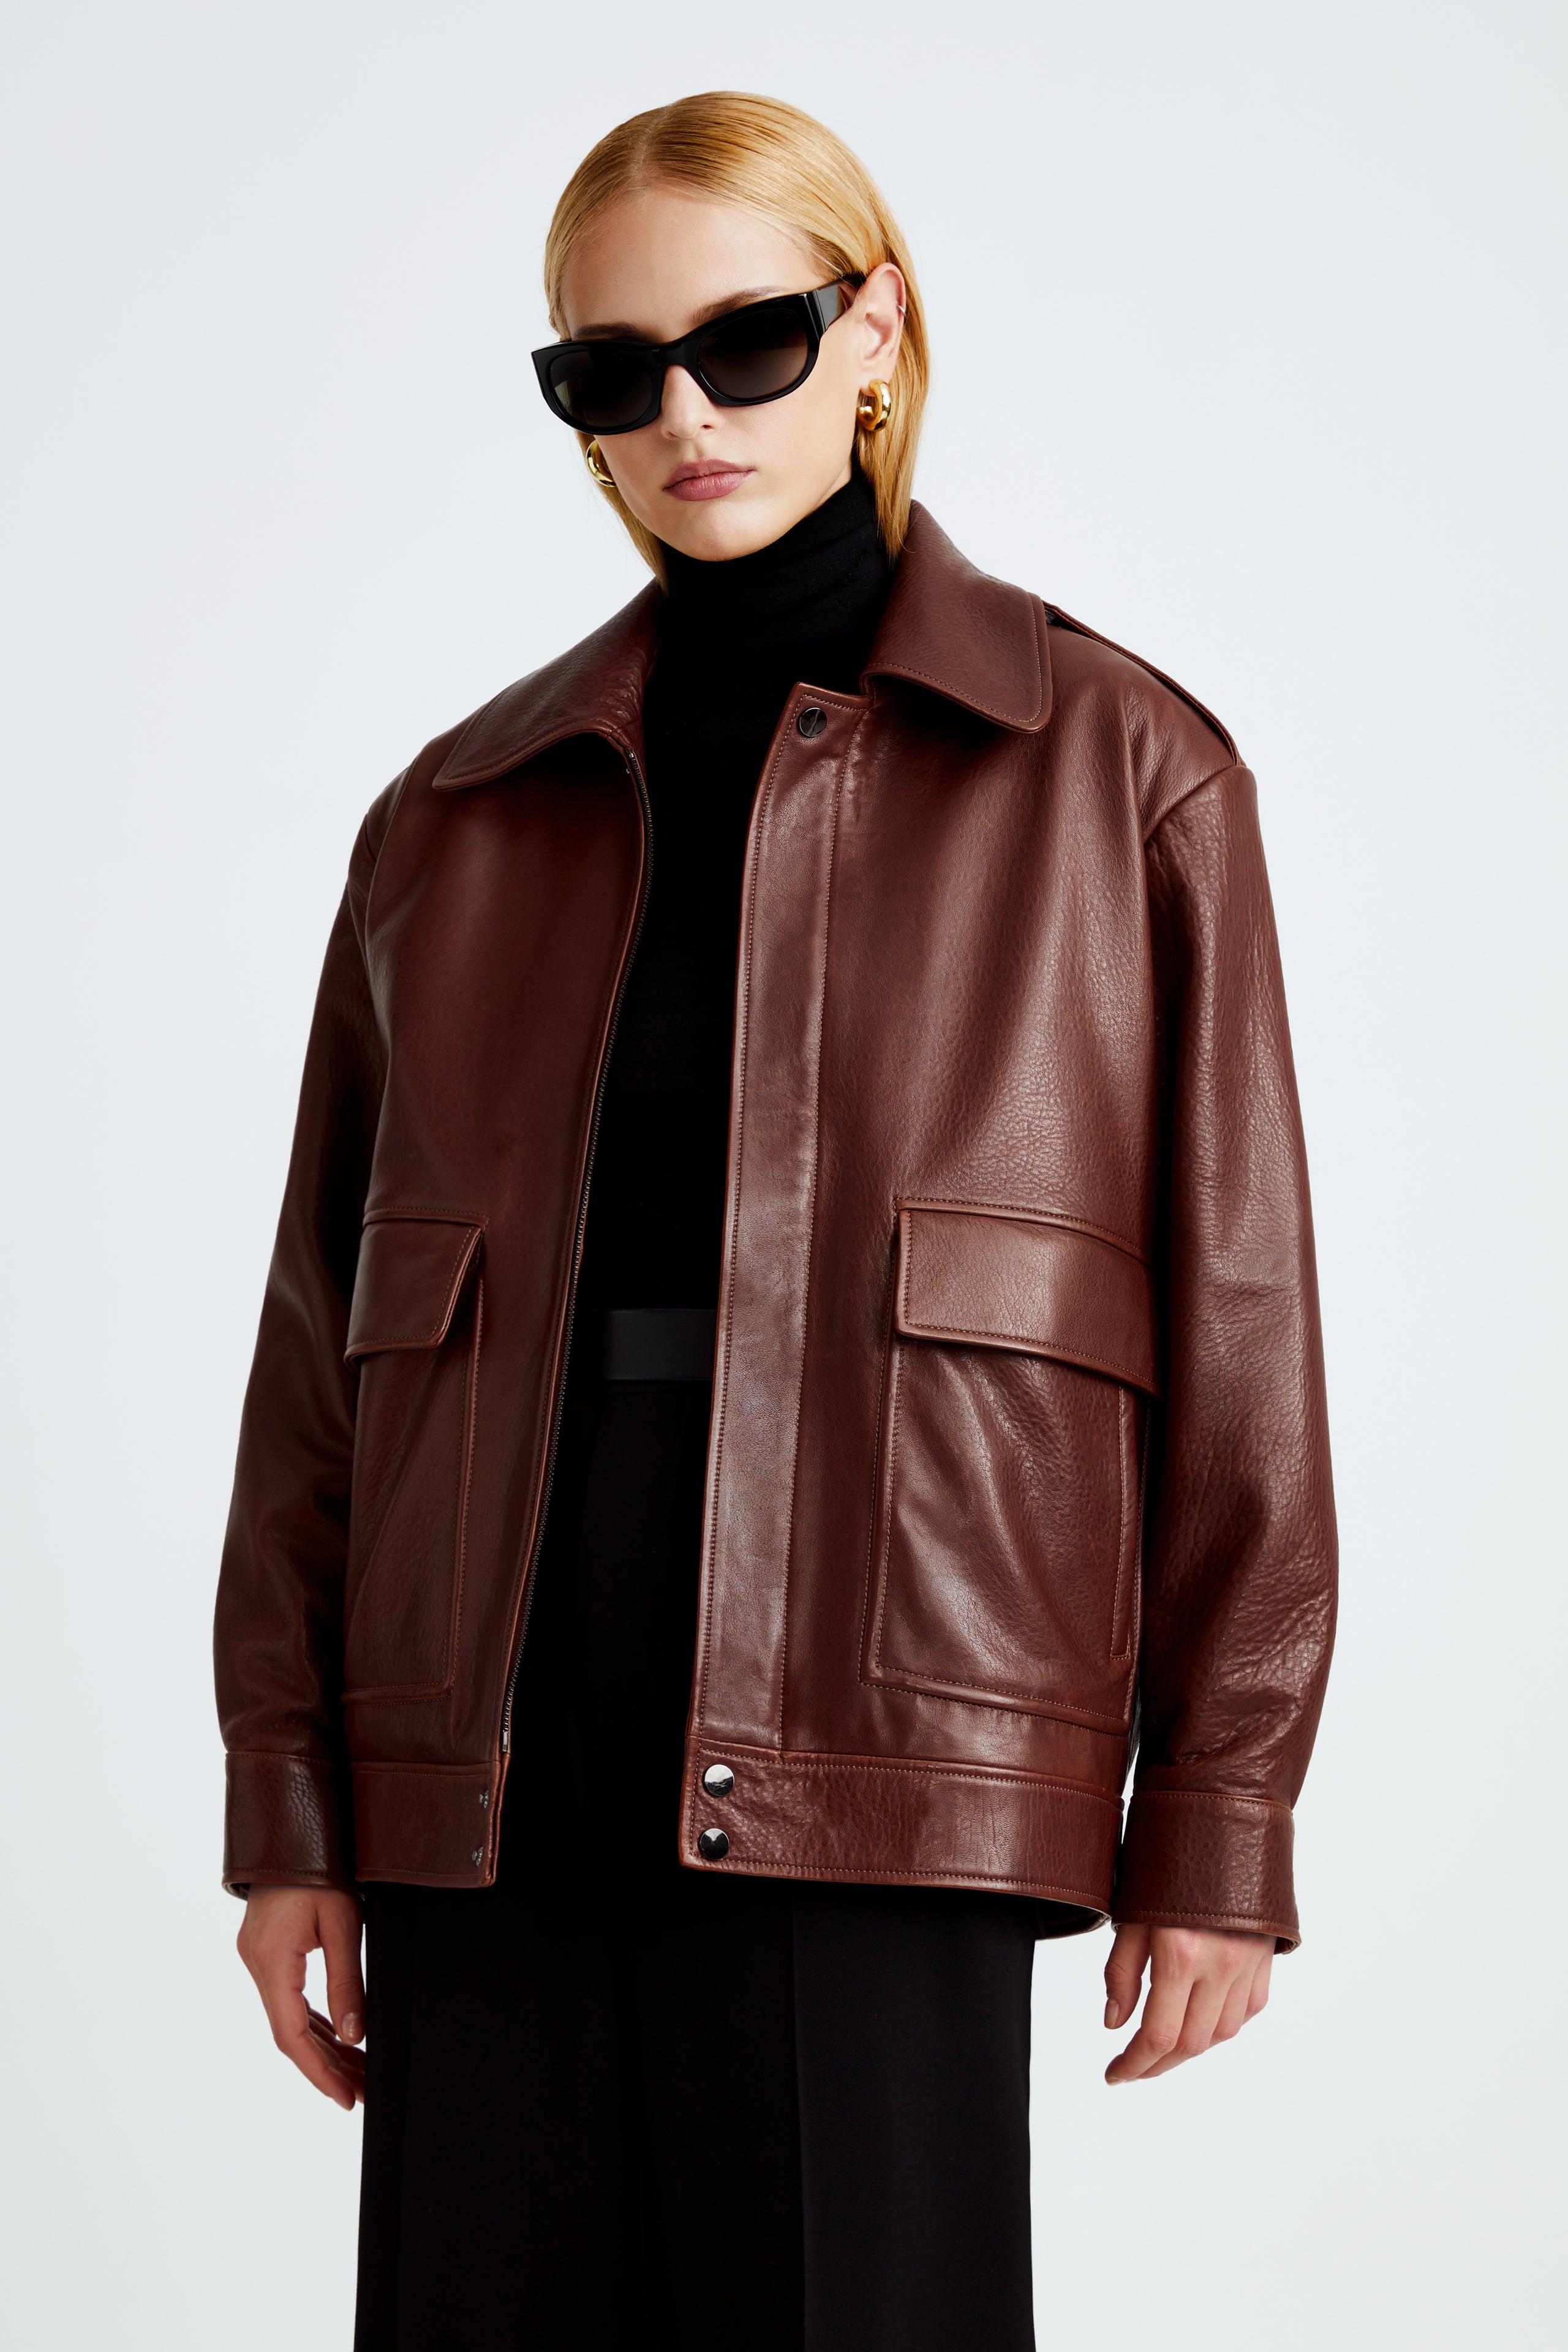 The Drey barolo utilitarian style relaxed jacket close up